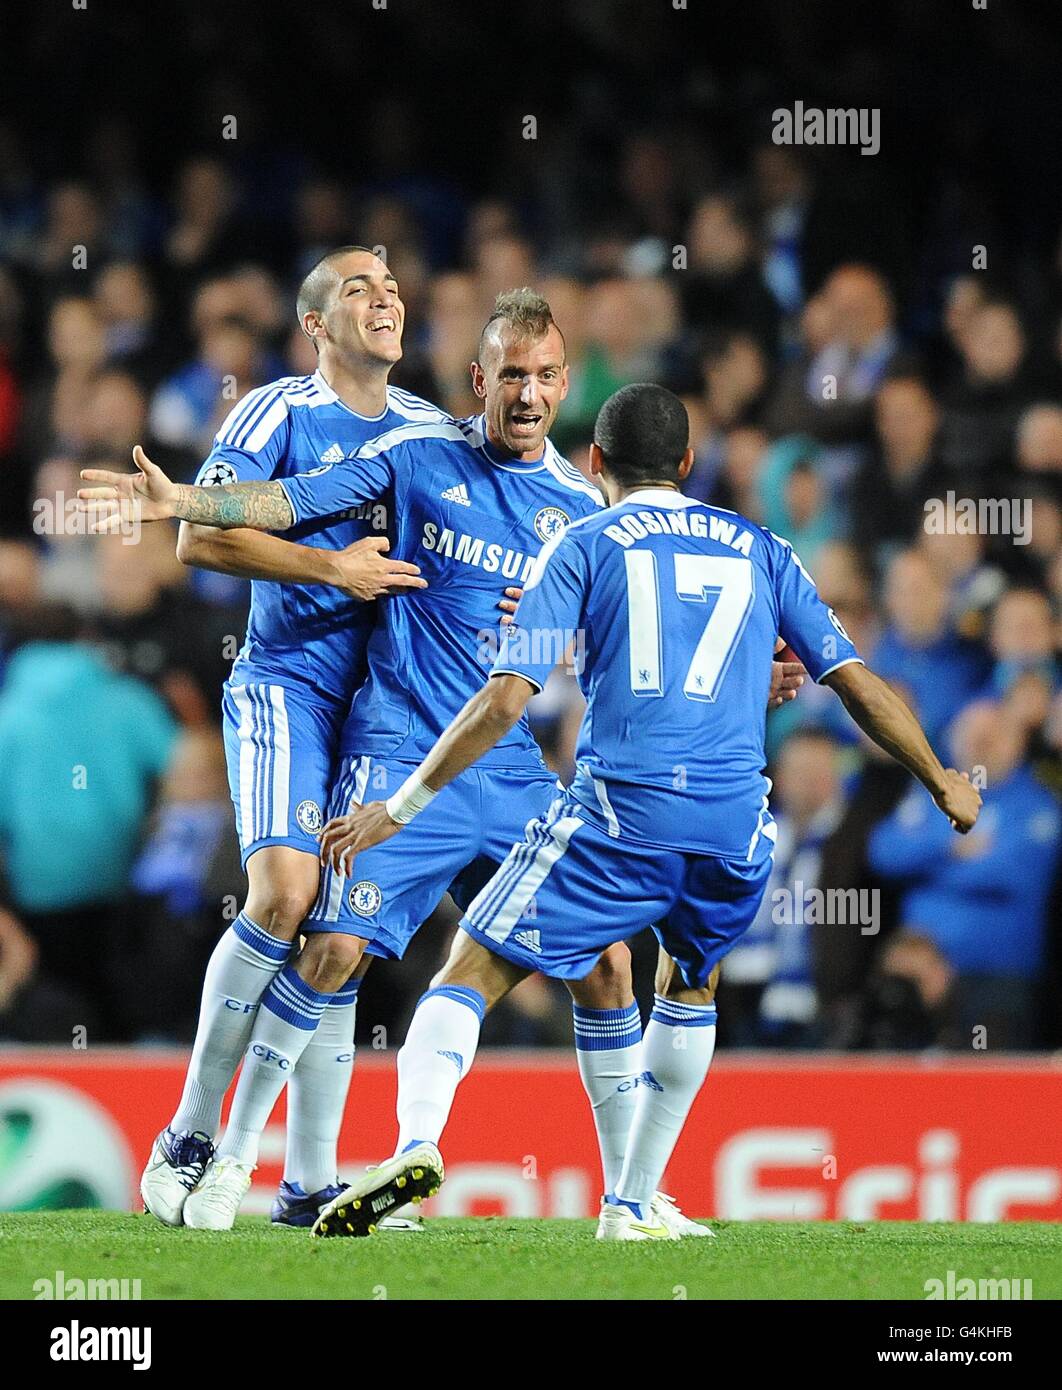 Chelsea's Raul Meireles celebrates with team mates Jose Bosingwa (right) and Oriol Romeu (left) after he scores the opening goal of the game Stock Photo